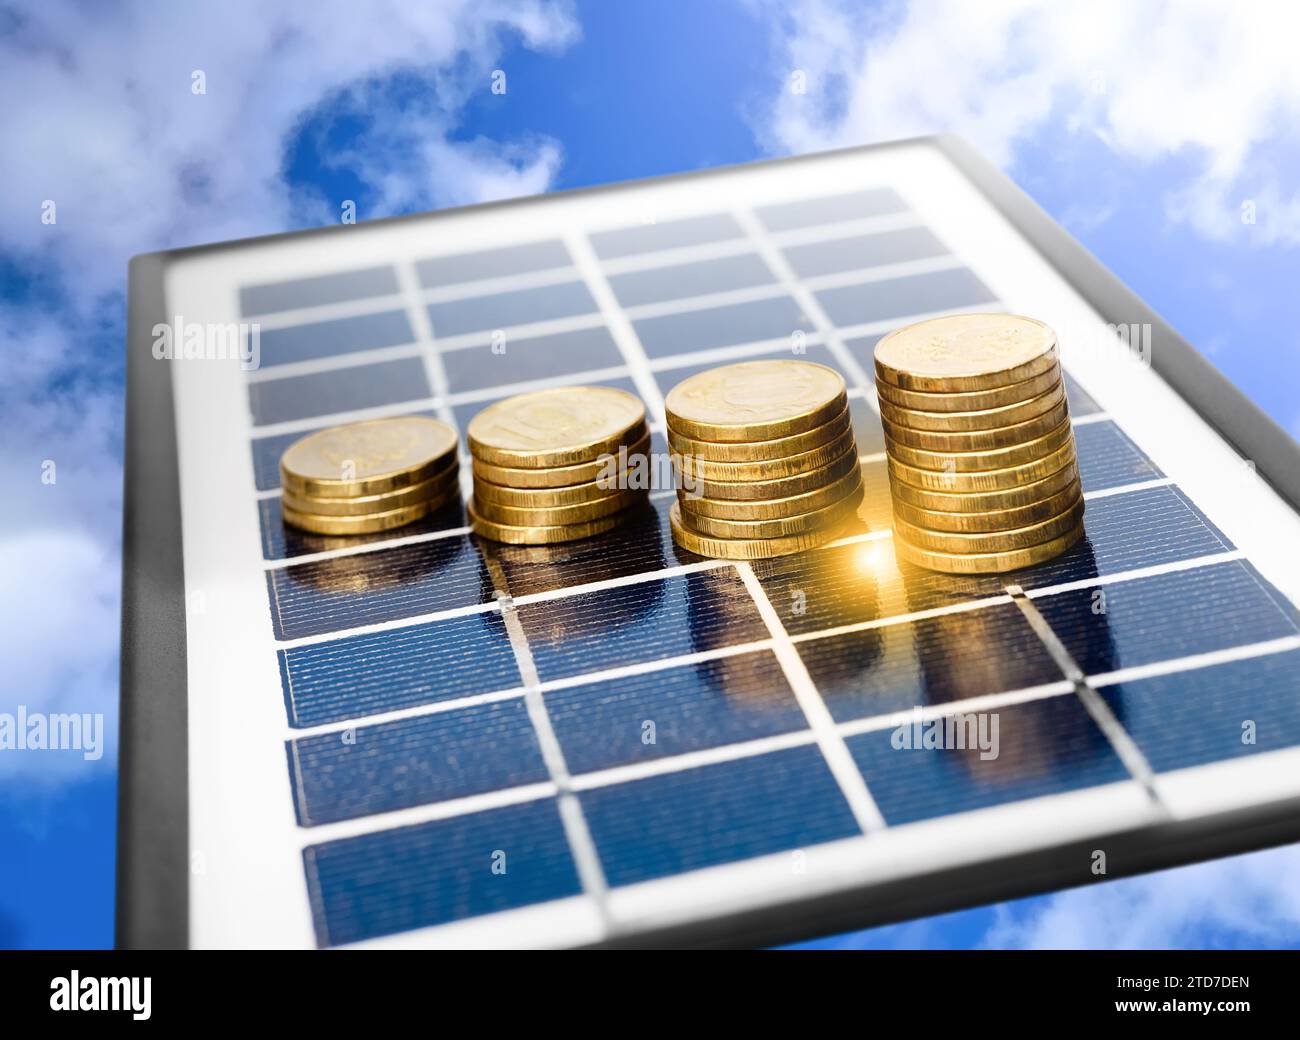 Stacks of yellow coins on a solar panel against a background of a blue sky with clouds. Concept of solar energy, saving and environmental friendliness Stock Photo